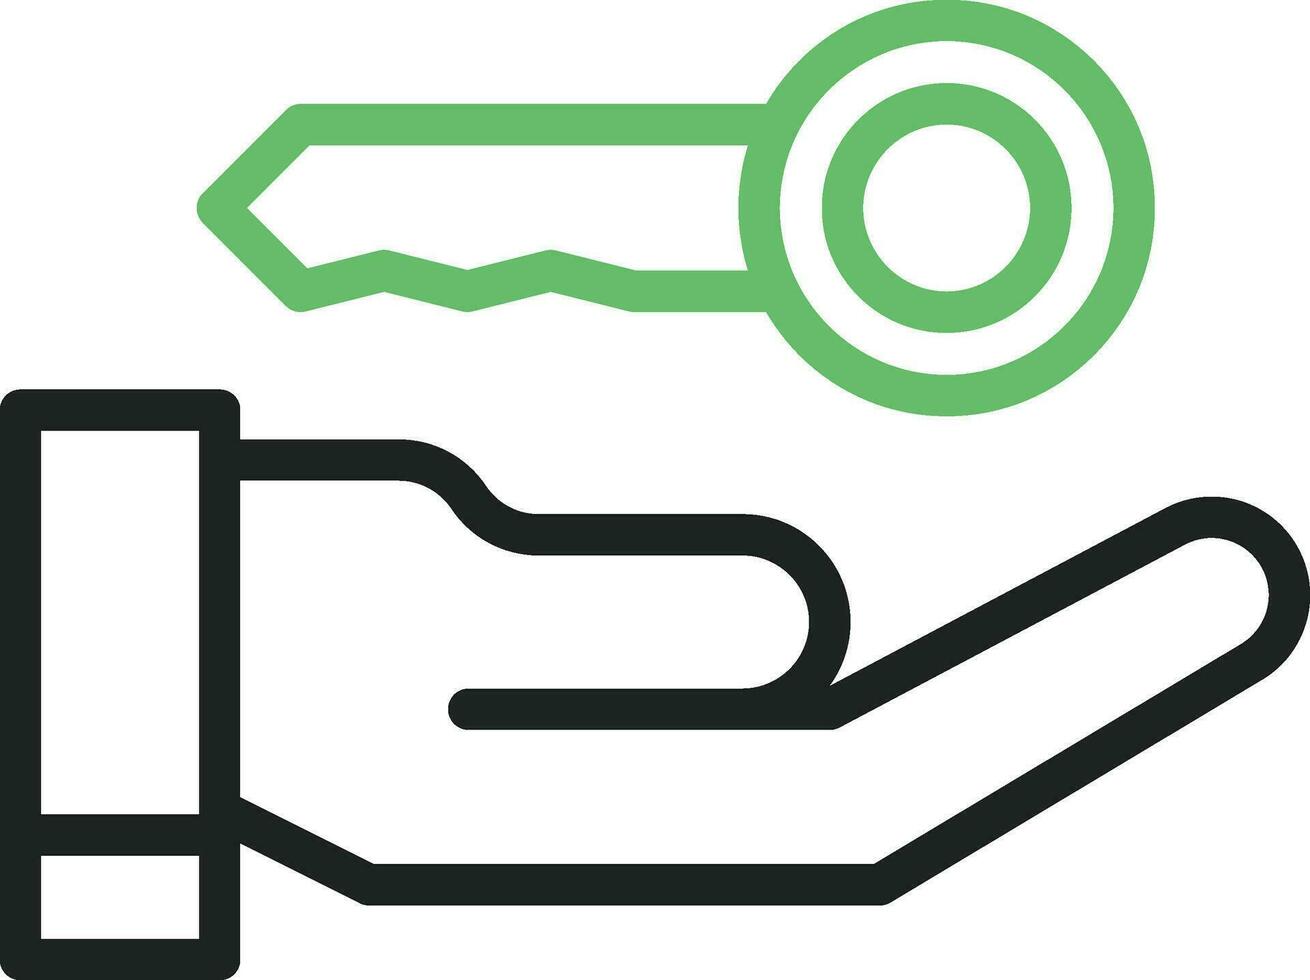 Secured Access Icon Image. vector